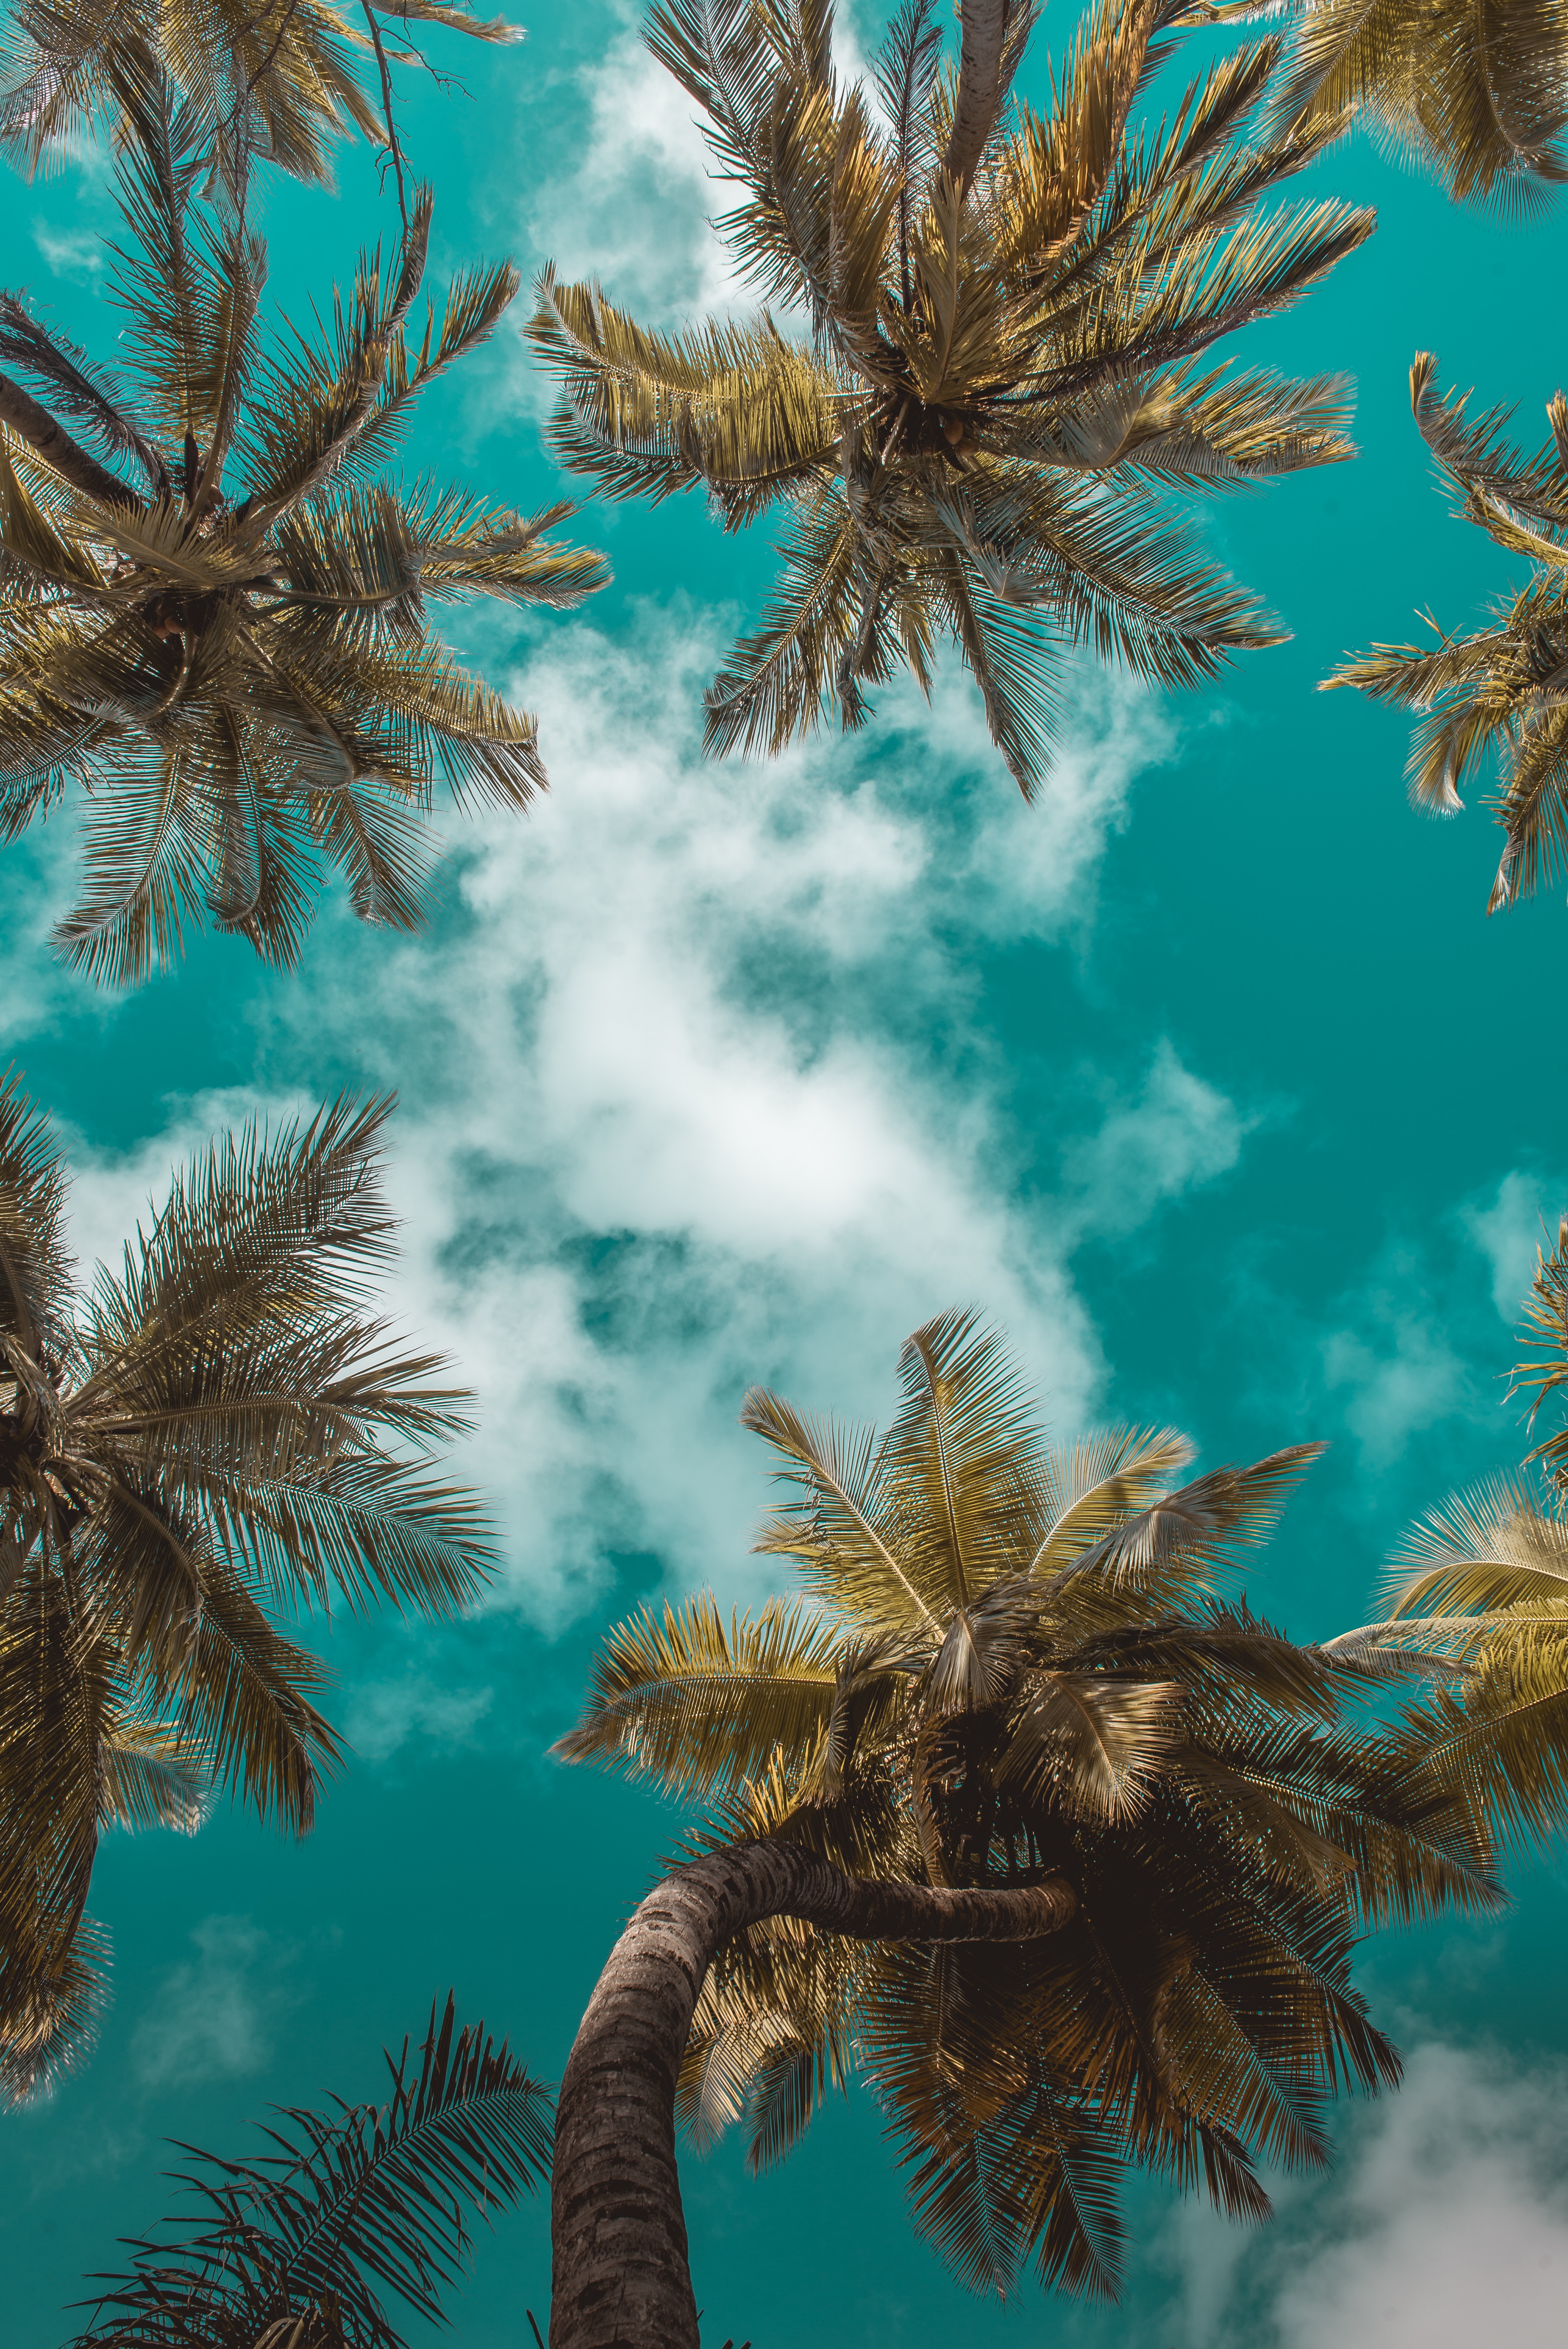 leaves, palms, nature, branches, sky, clouds, tropics, bottom view images